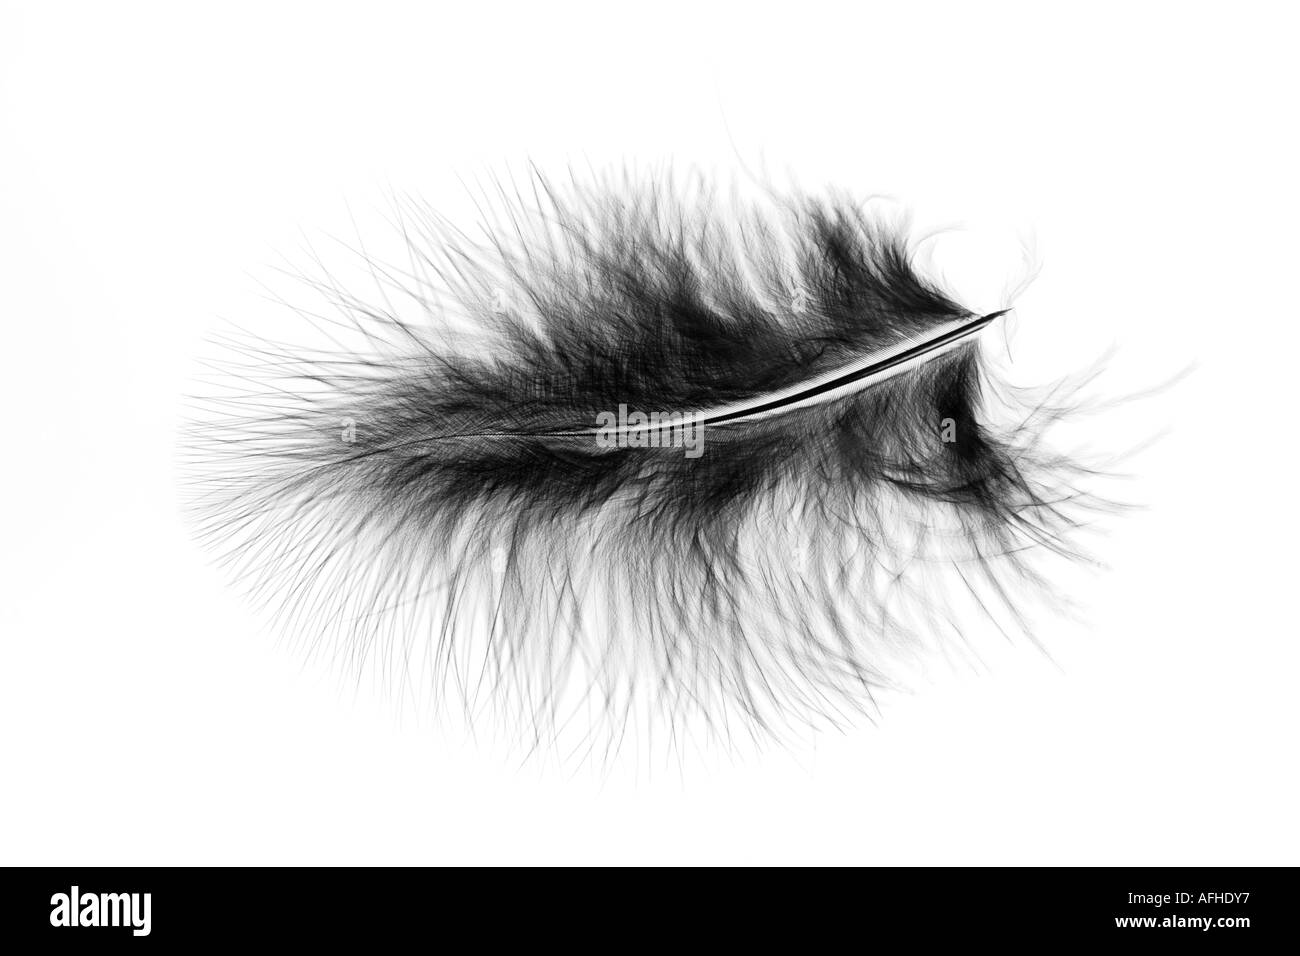 A Black Marabou Feather photographed on a light box showing delicate detail. Stock Photo